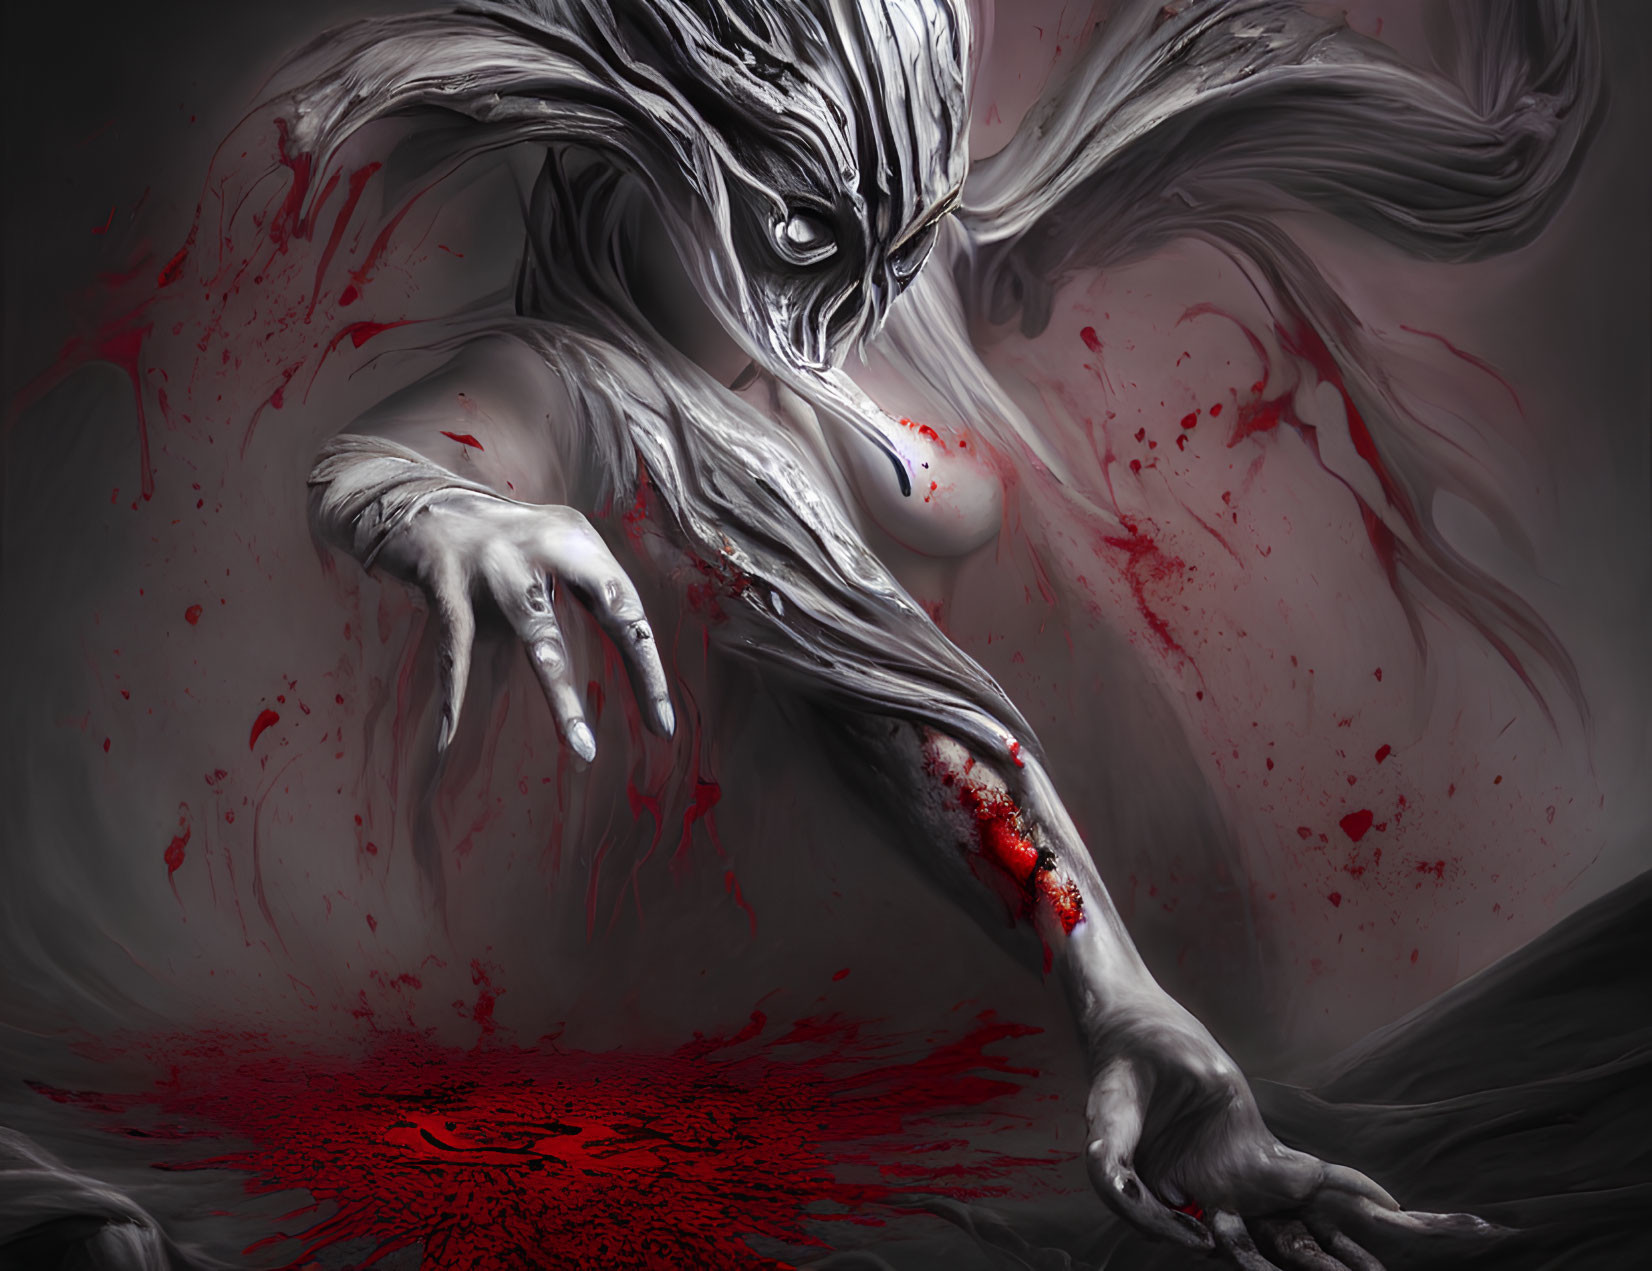 Sinister ethereal creature illustration with sharp features and splattered blood